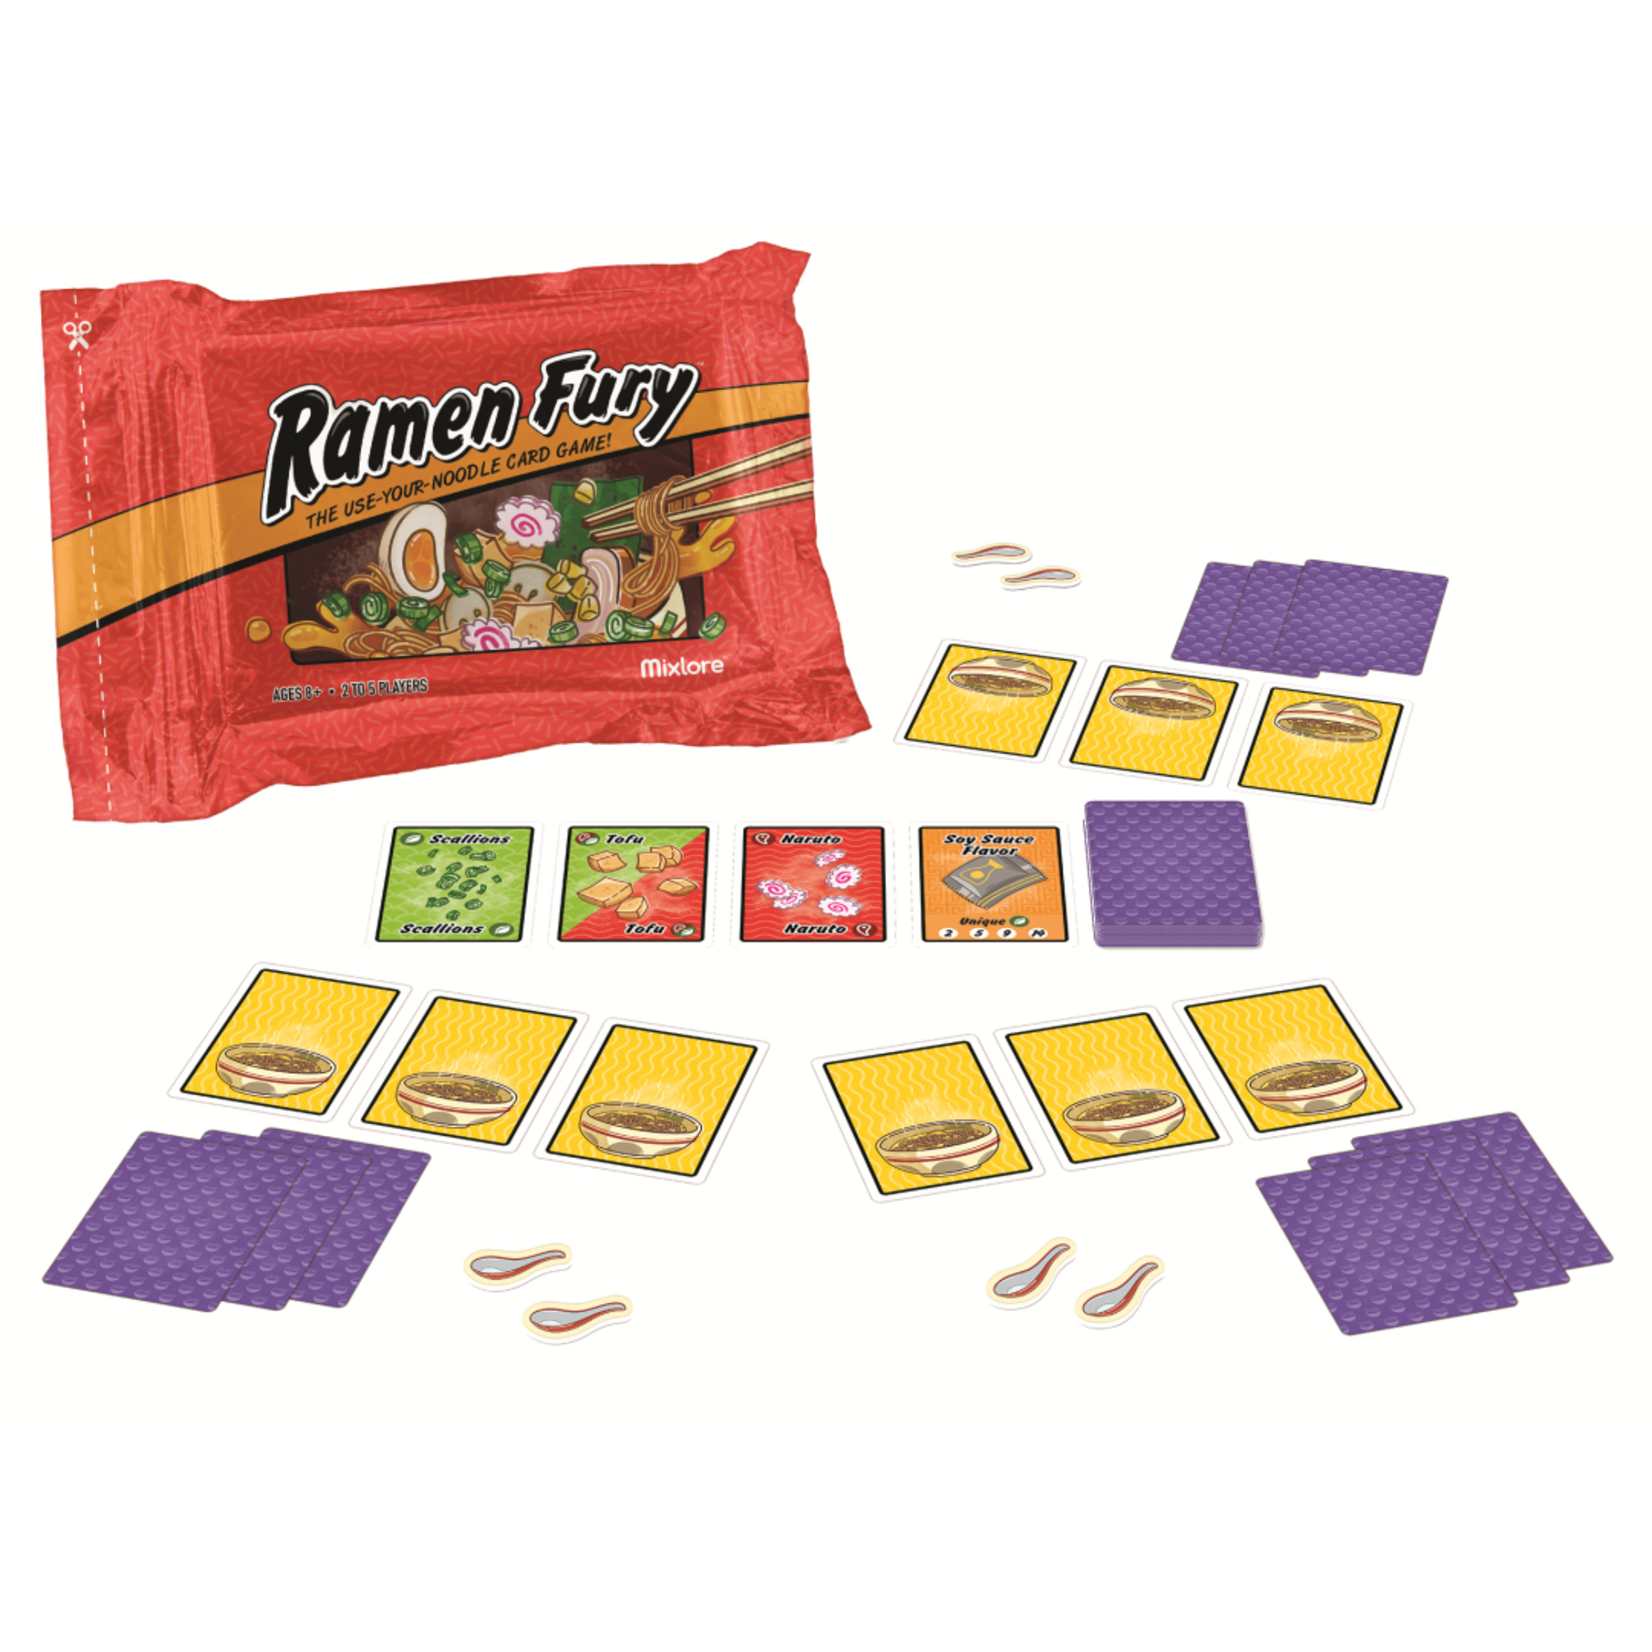 NEW Ramen Fury Noodle Card Game By Mixlore 